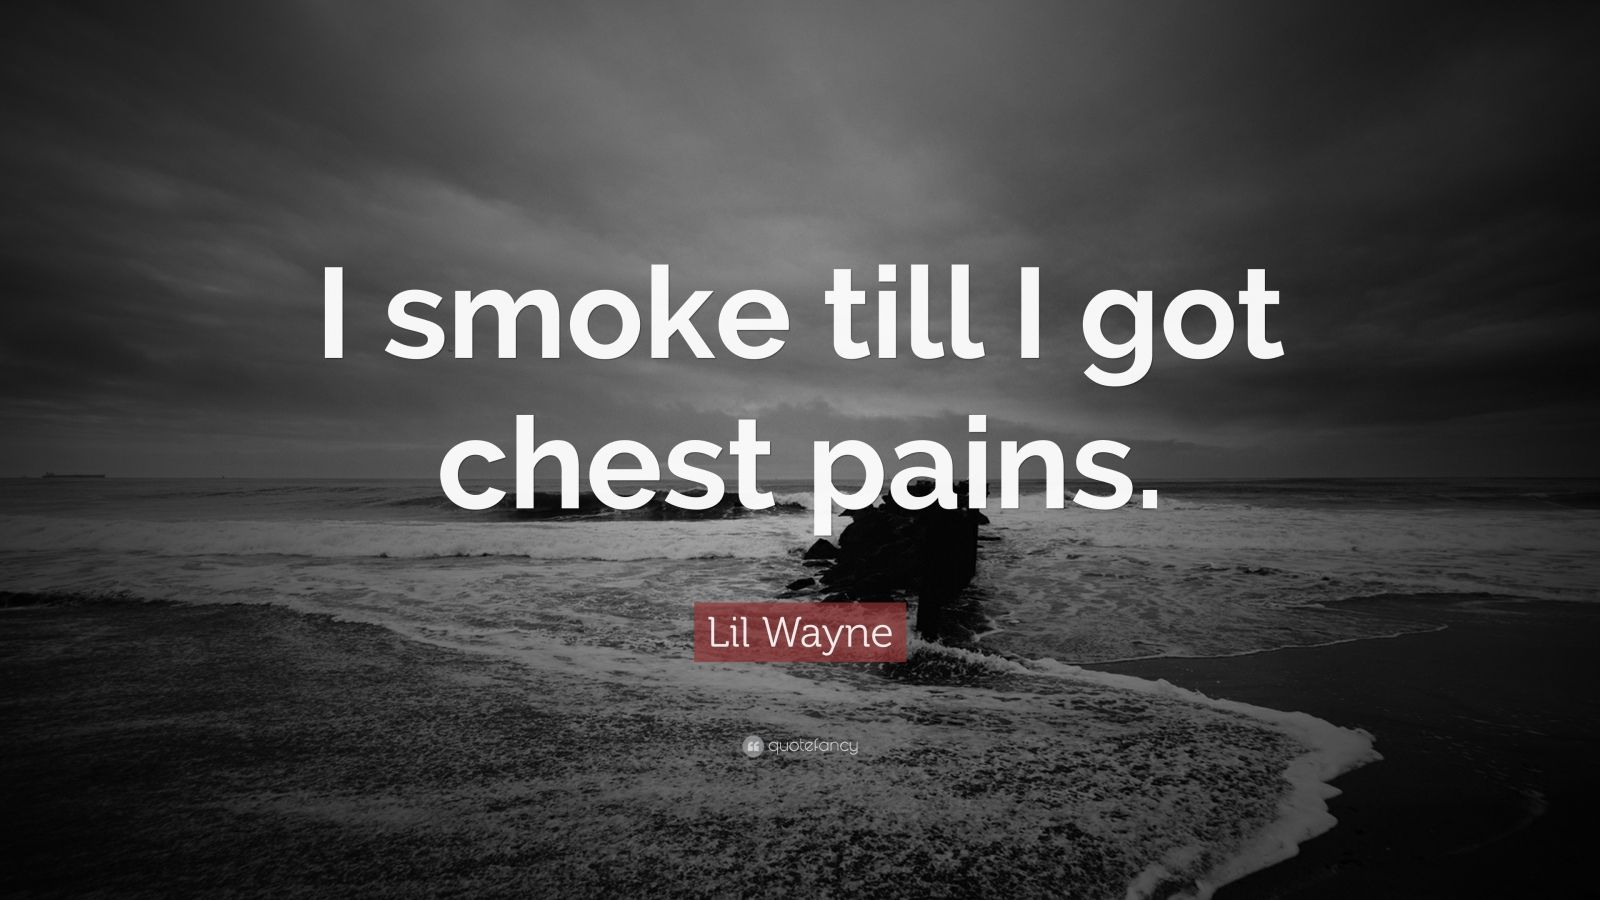 lil wayne quote i smoke till i got chest pains - Lil Wayne Quotes